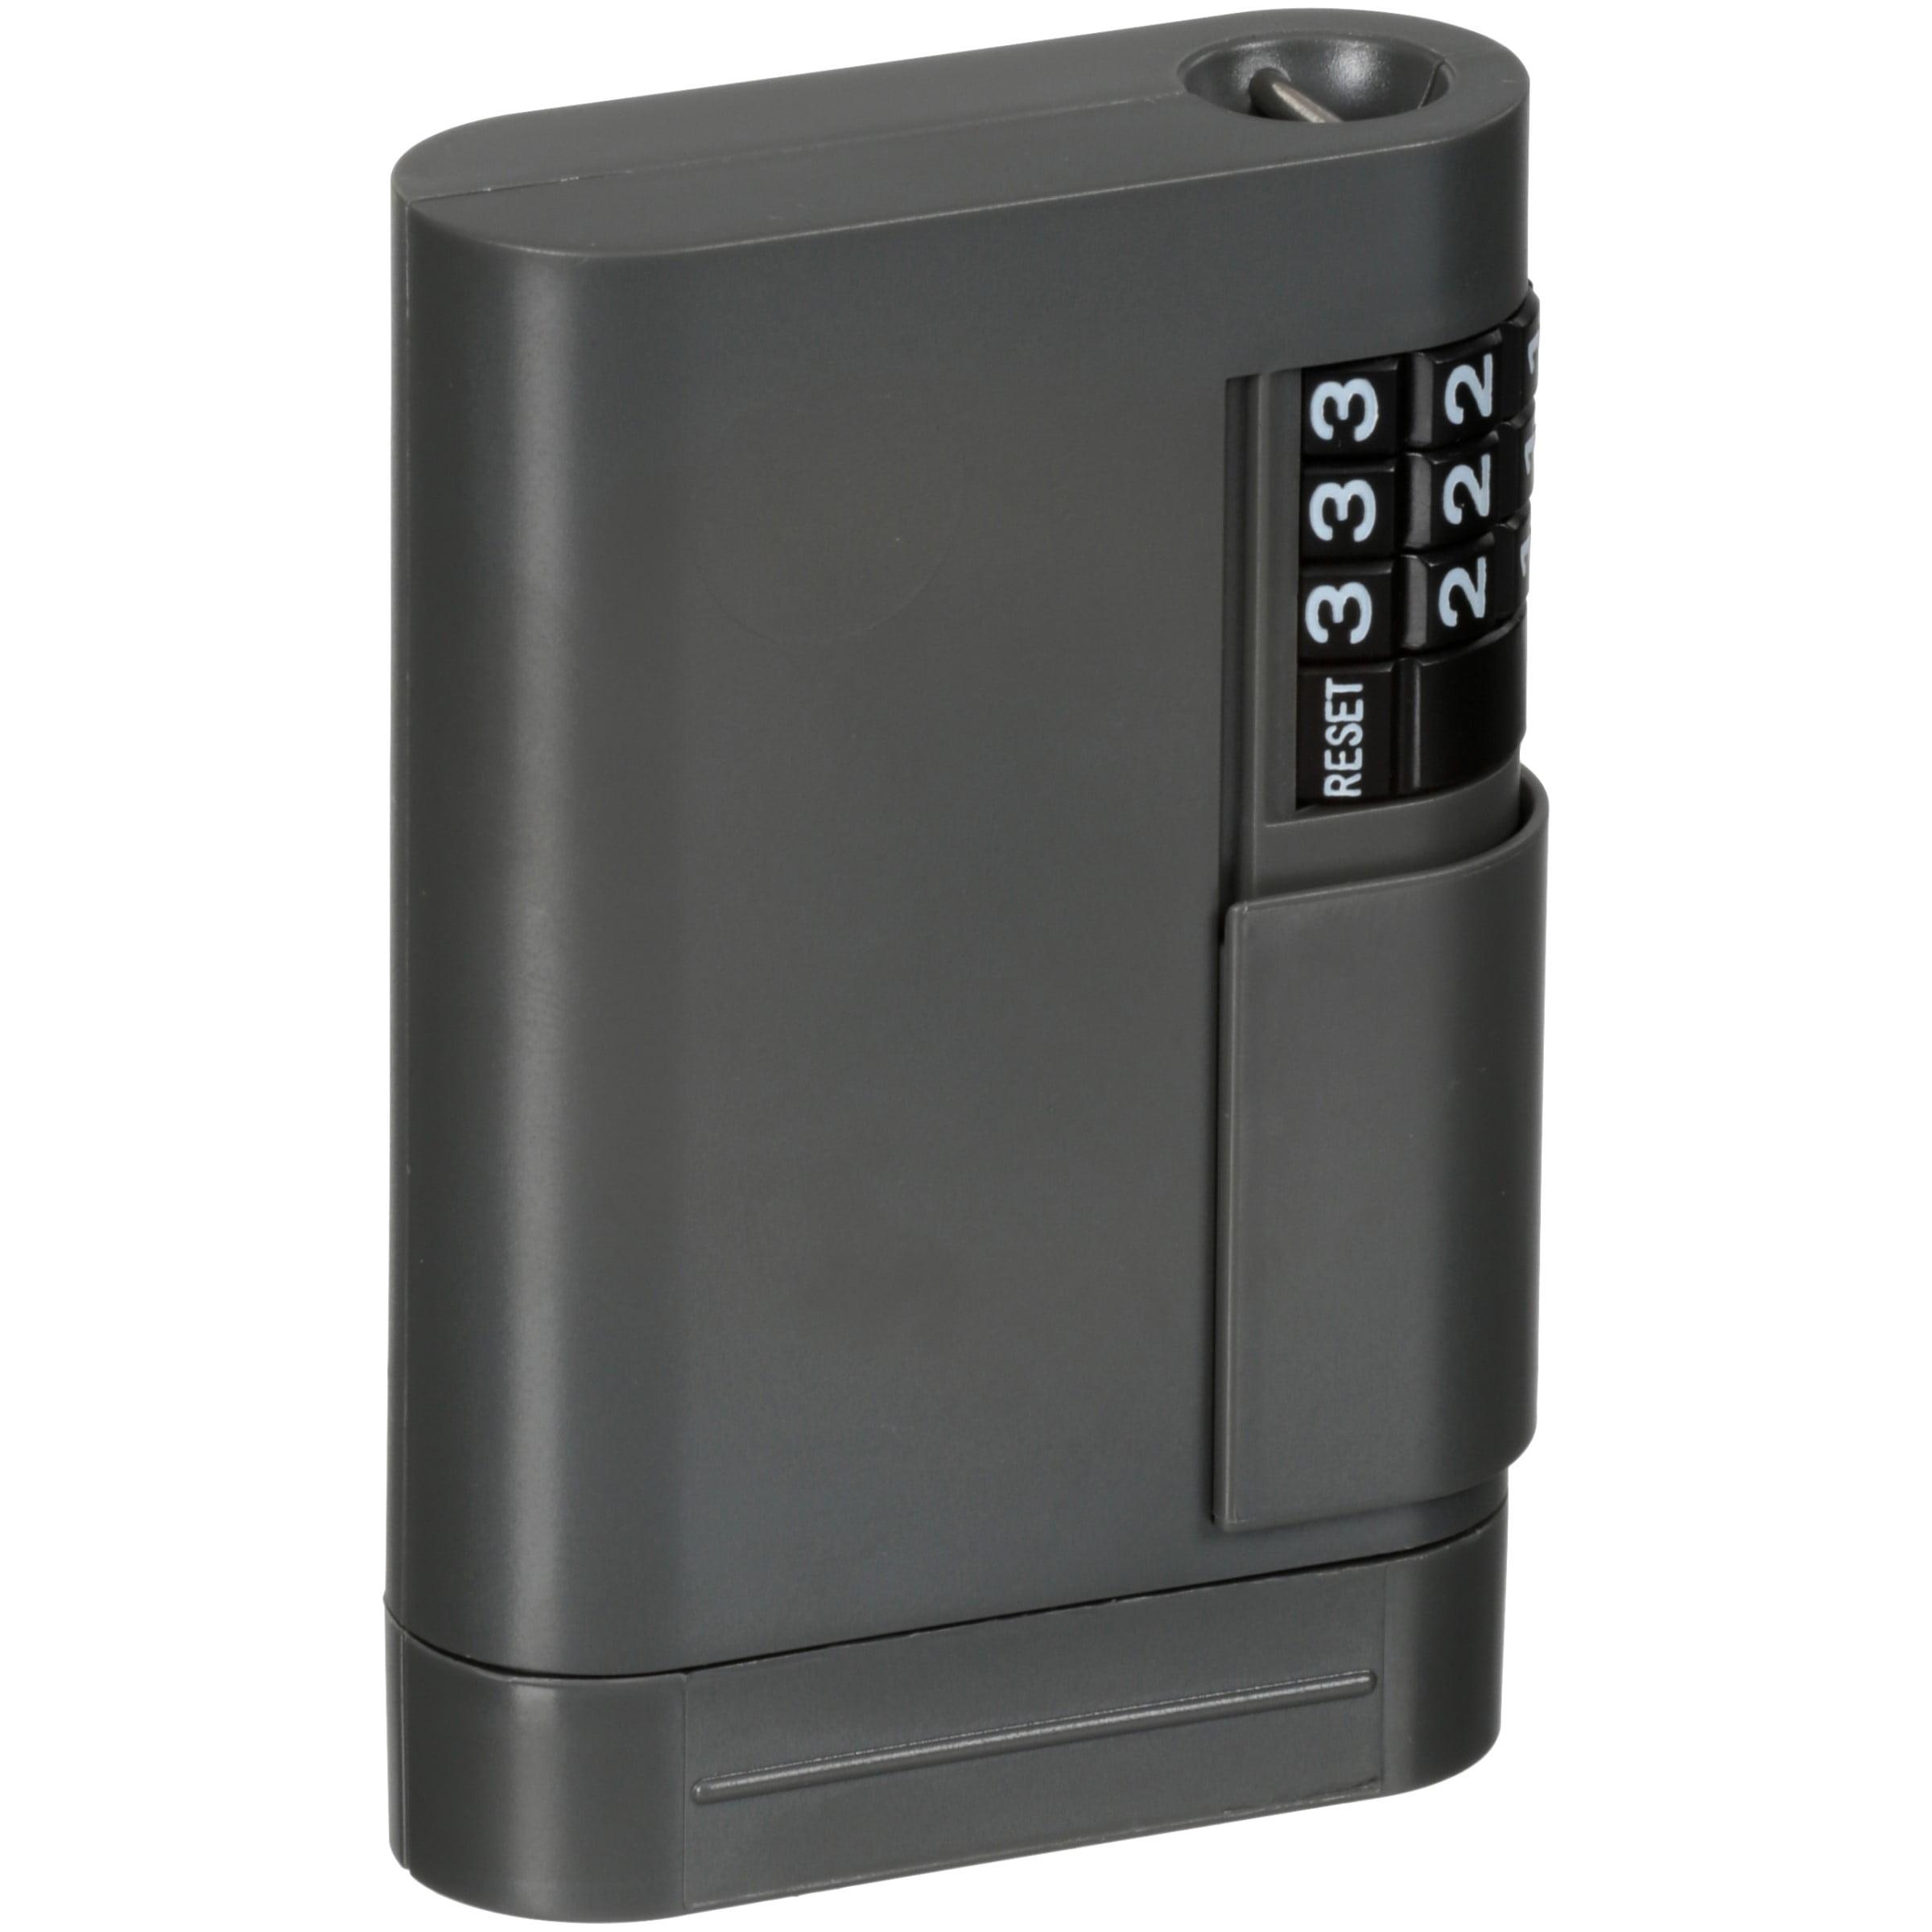 Extra-Large Gray Metal Touchpad Electronic Key Safe with Foam Insert